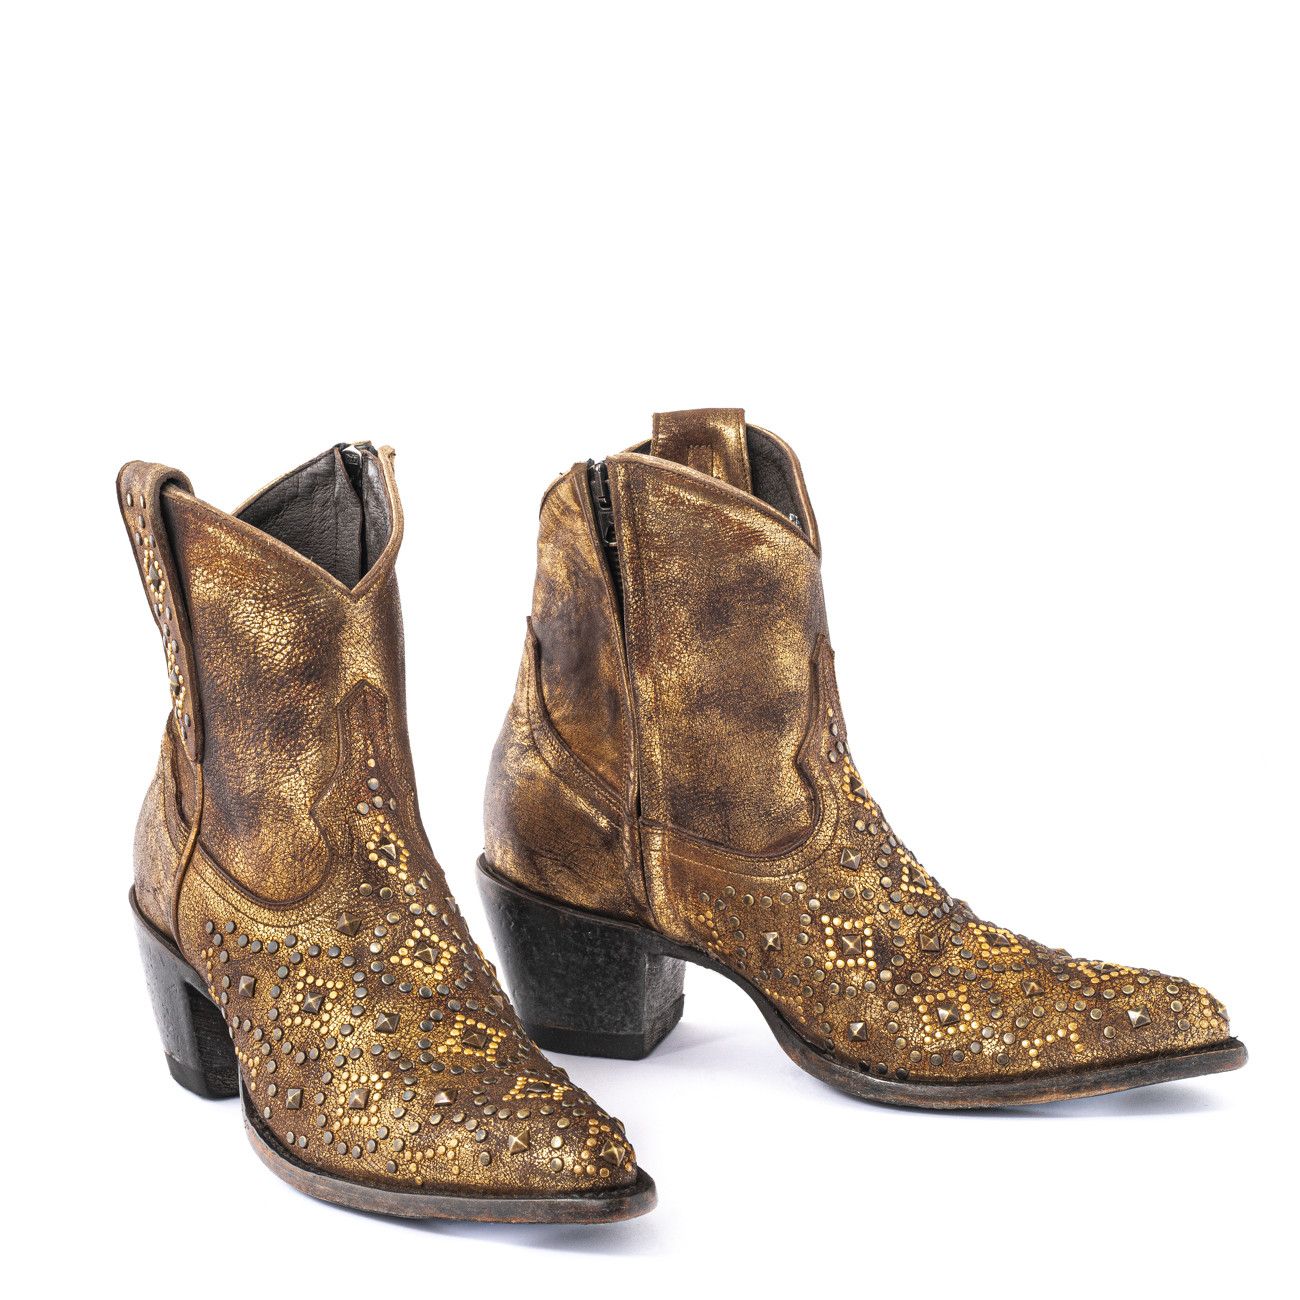 ELECTRA GOLD USED COGNAC POINTED TOE ANKLE BOOTS WITH    STUDS AND SIDE ZIP CLOSURE    Total heel height 2.6 Inches    100% cow 